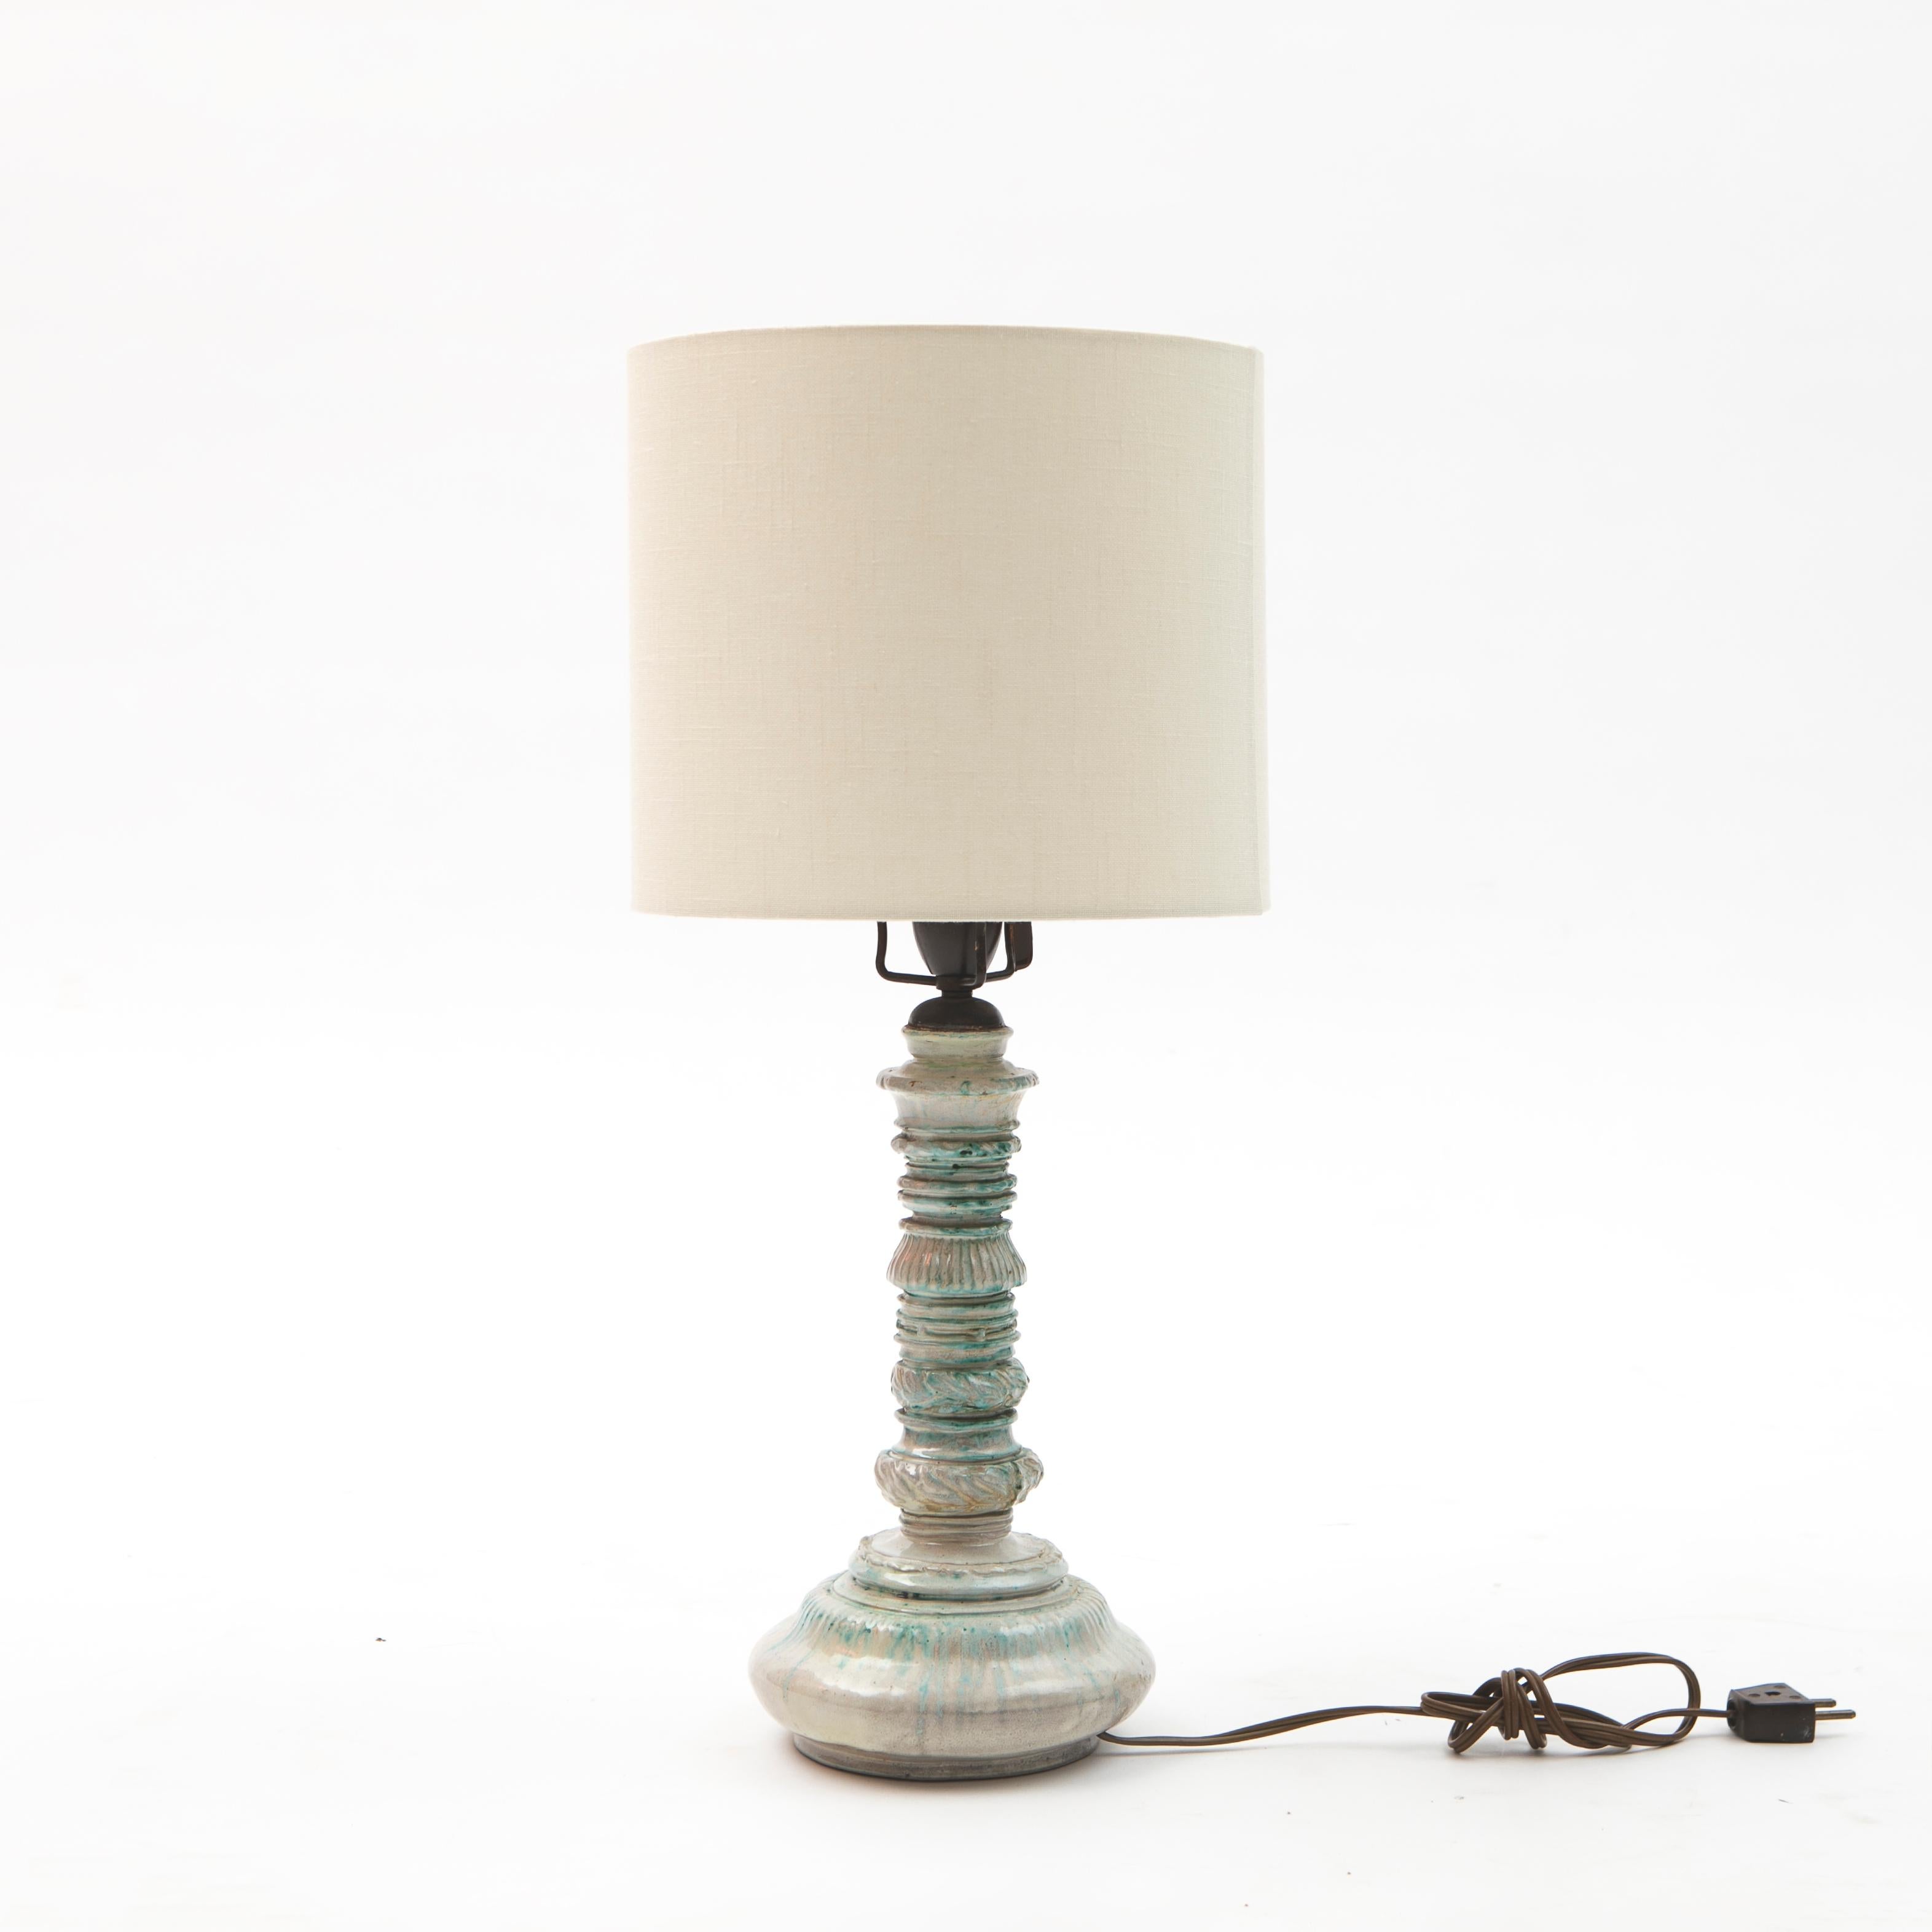 Rare table lamp by Svend Hammershøi for Kähler, Denmark, 1930-1950.
Glazed stoneware features light gray and turquoise colors.

Height to socket: 30 cm.
Diameter lamp foot: 17 cm.